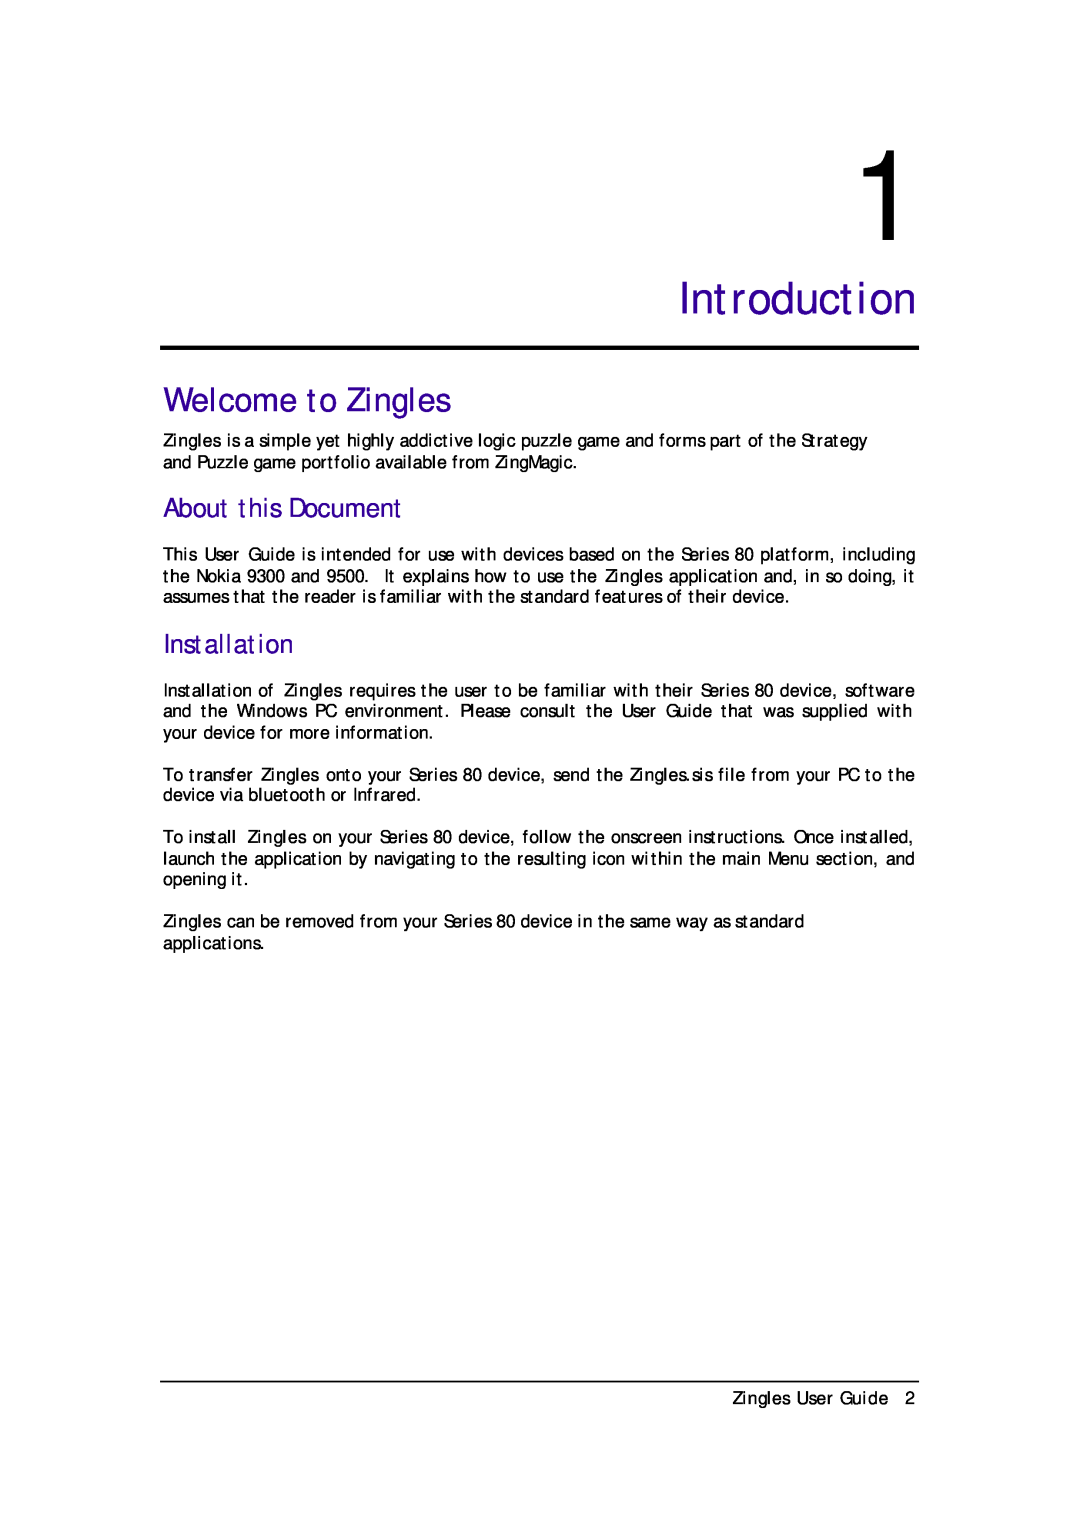 Zing Magic Series 80 manual Introduction, Welcome to Zingles, About this Document, Installation, Zingles User Guide 